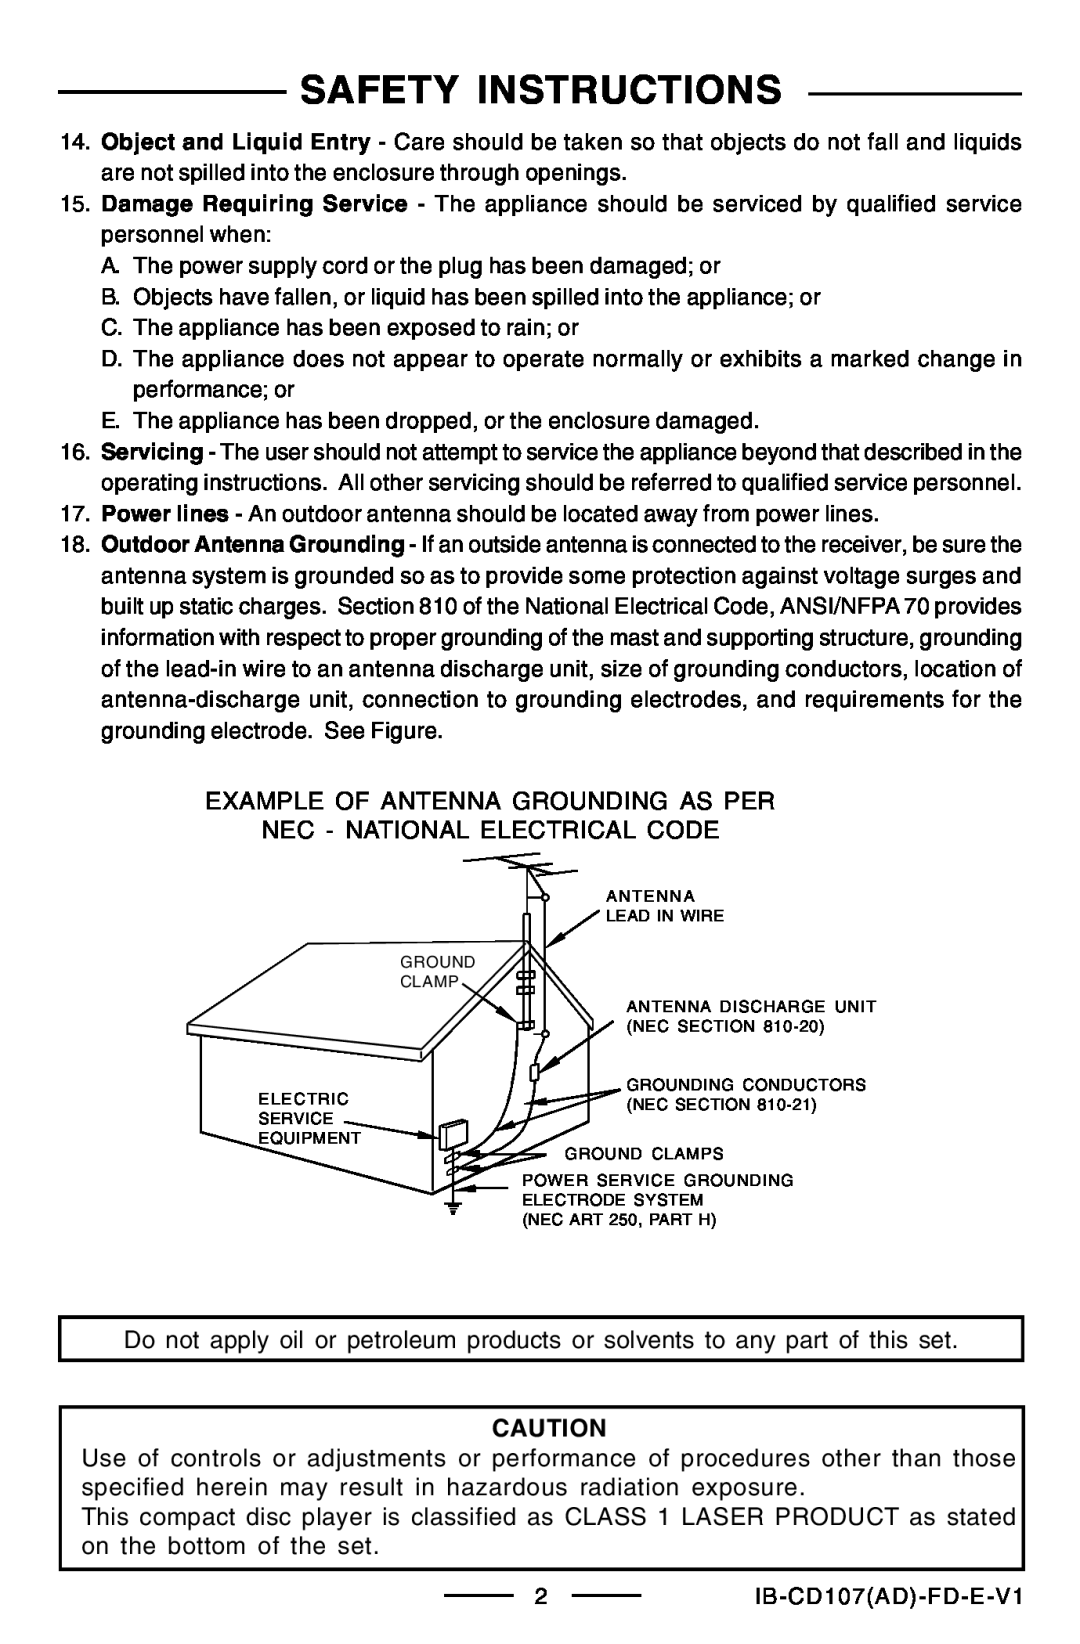 Lenoxx Electronics CD-107 manual Safety Instructions, Example Of Antenna Grounding As Per Nec - National Electrical Code 